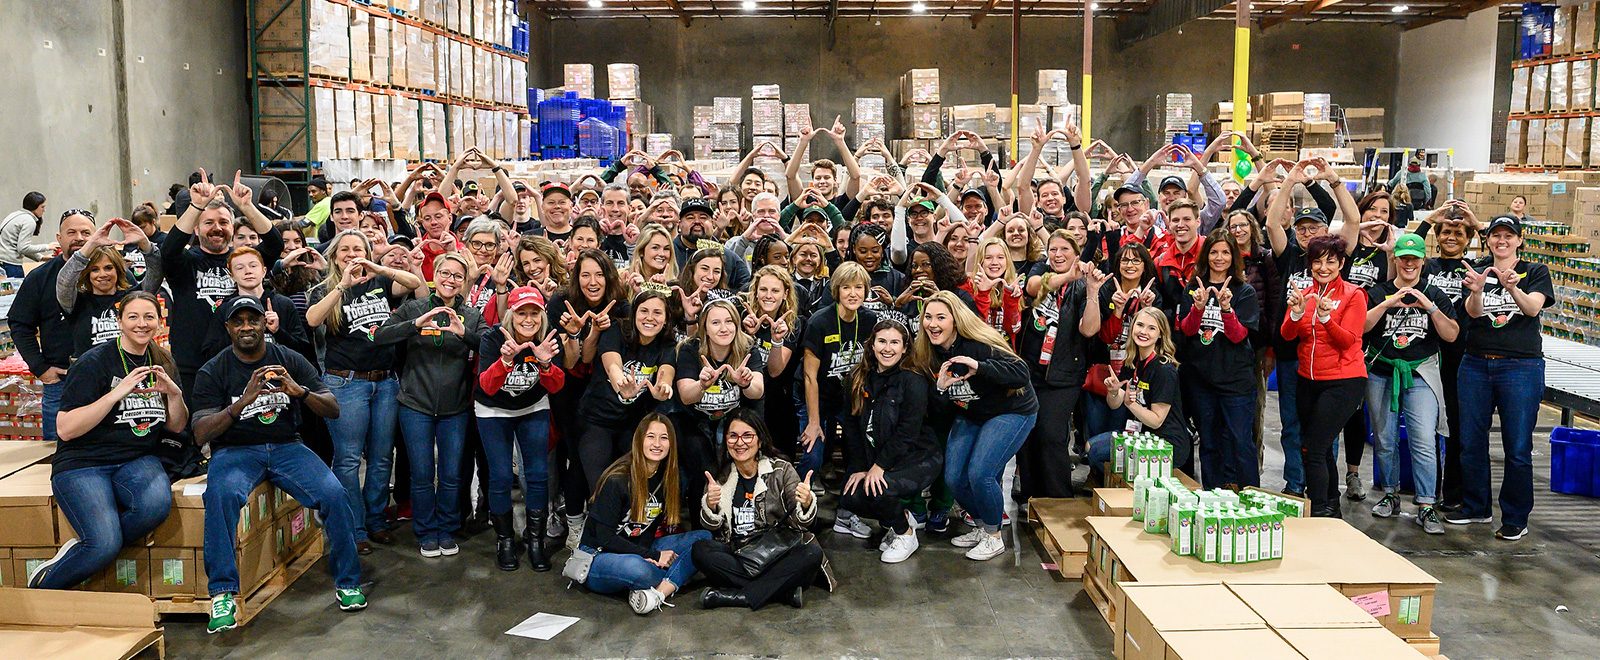 More than 100 volunteers from the University of Wisconsin-Madison and the University of Oregon are pictured at the Los Angeles Regional Food Bank